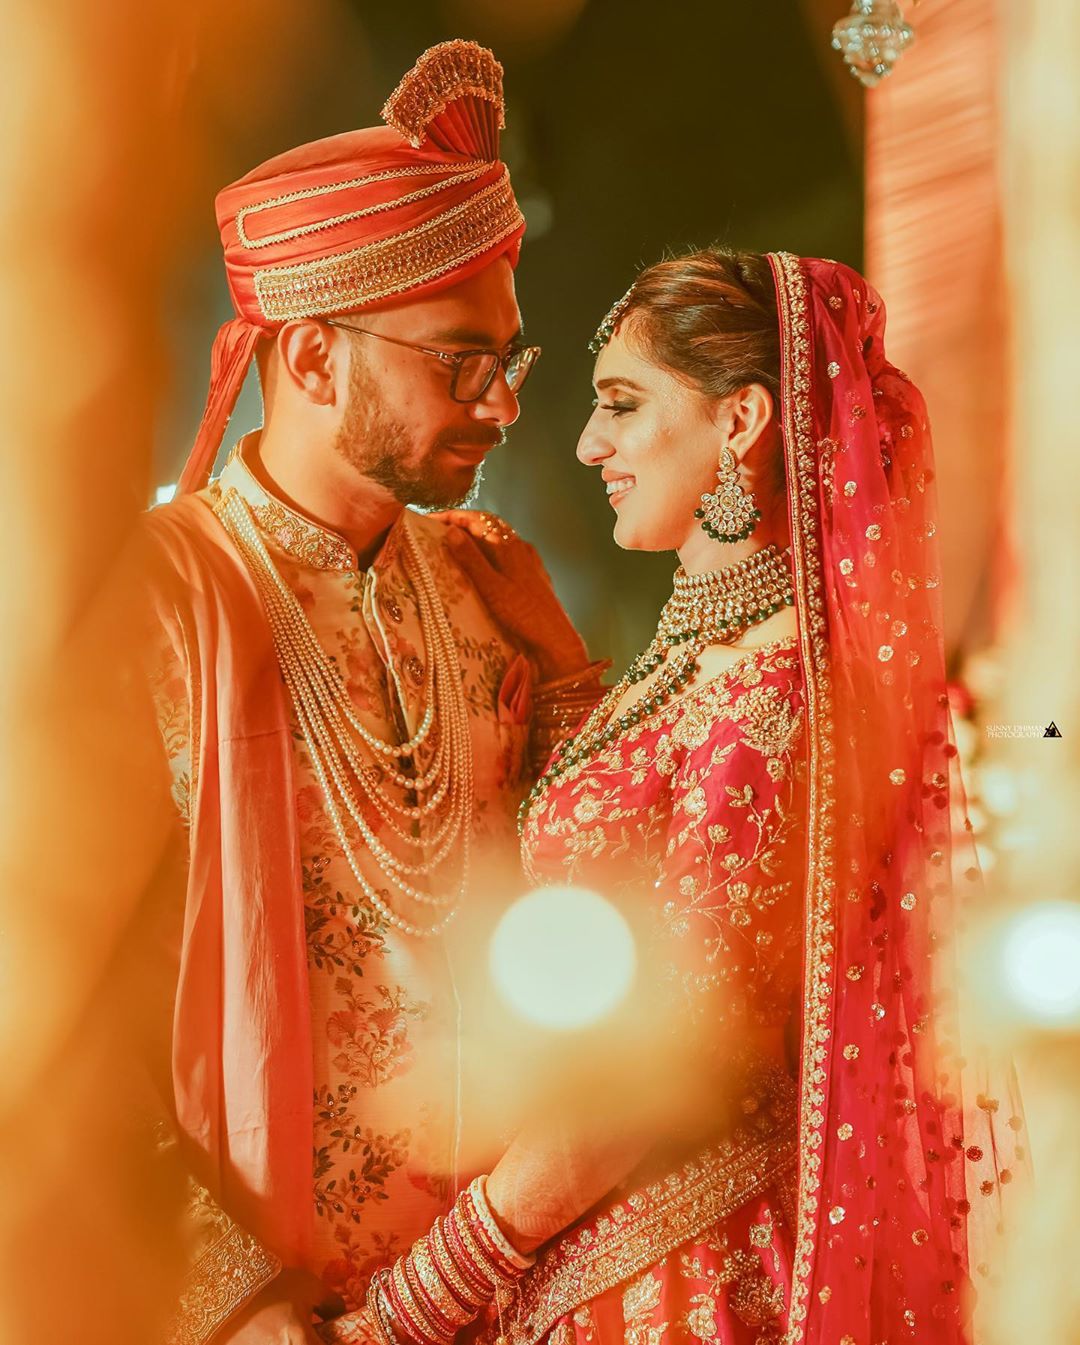 From Their Poolside Mehendi Ceremony to Their Sparkling Sangeet Night; this Bengali Wedding will Leave You Mesmerized.